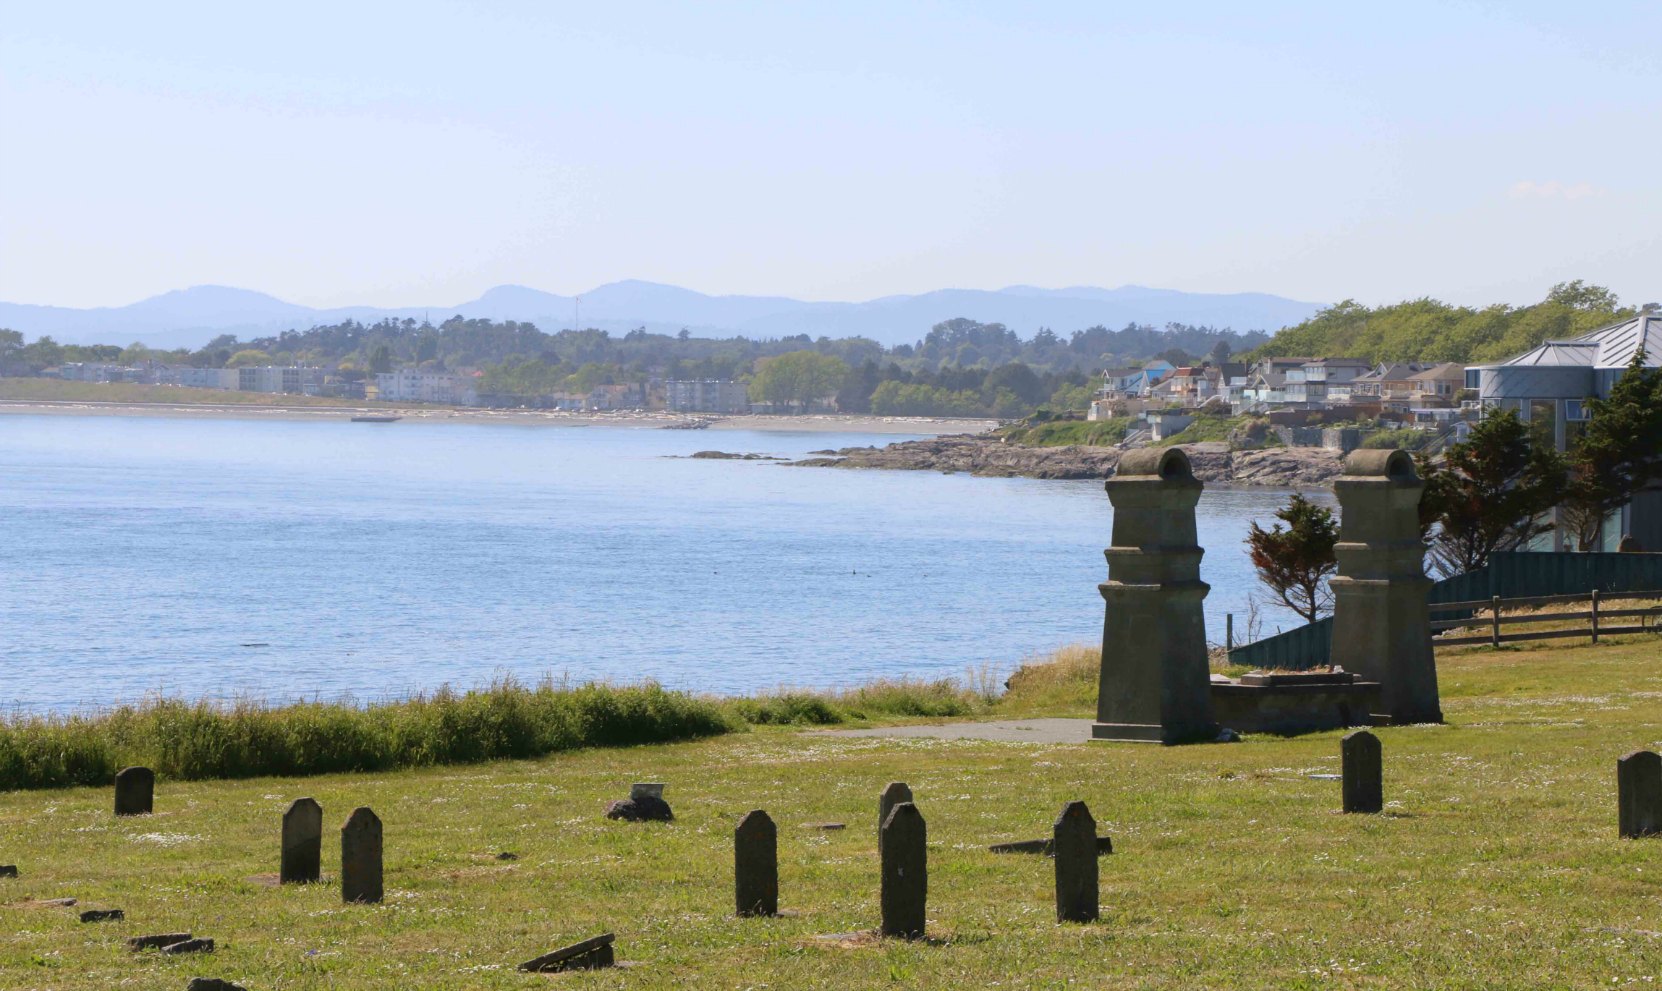 Graves around the altar in the Chinese Cemetery, with Ross Bay in the background